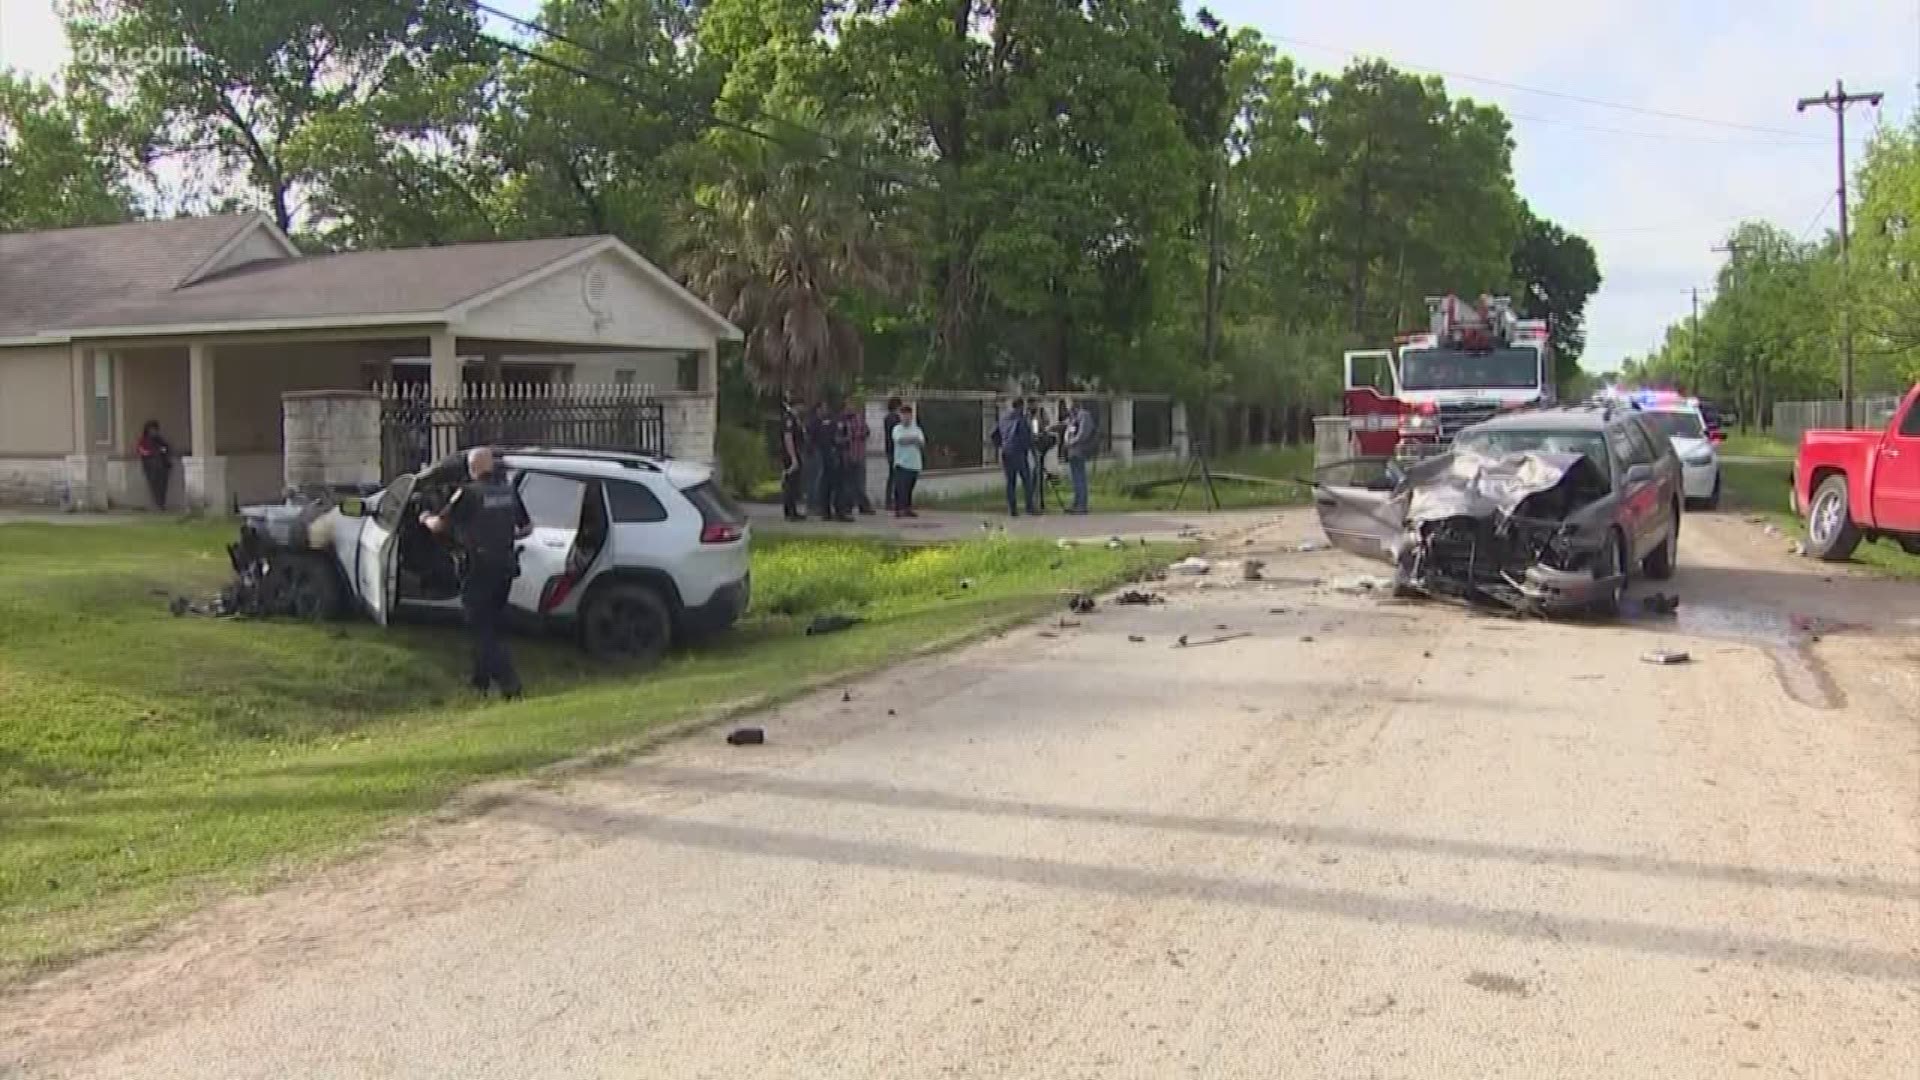 A child who was in "bad shape" according to Harris County deputies after a terrible crash Tuesday morning in the northeastern part of the county.